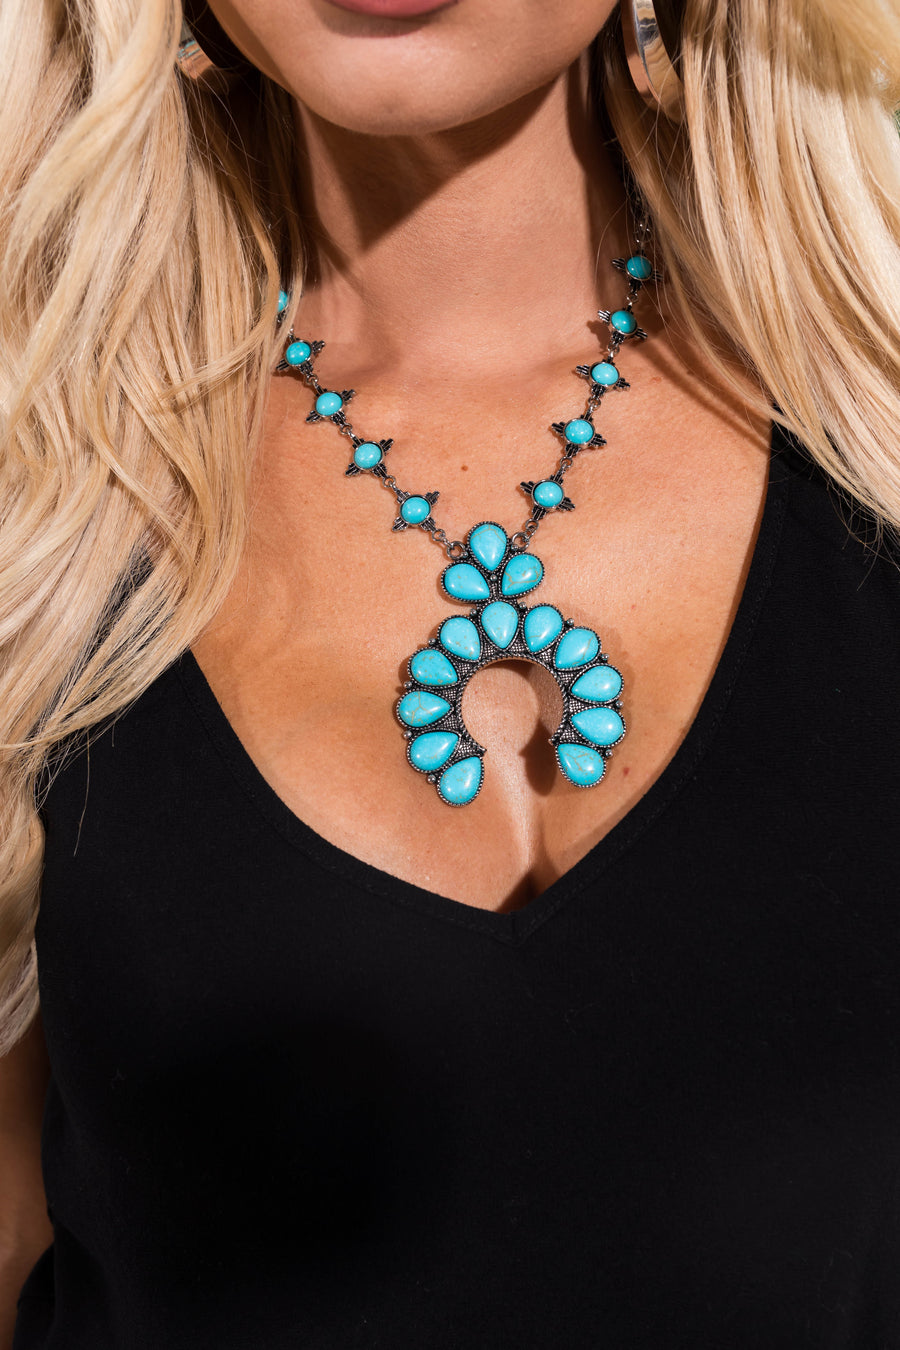 Intricate Graphite and Turquoise Stone Necklace